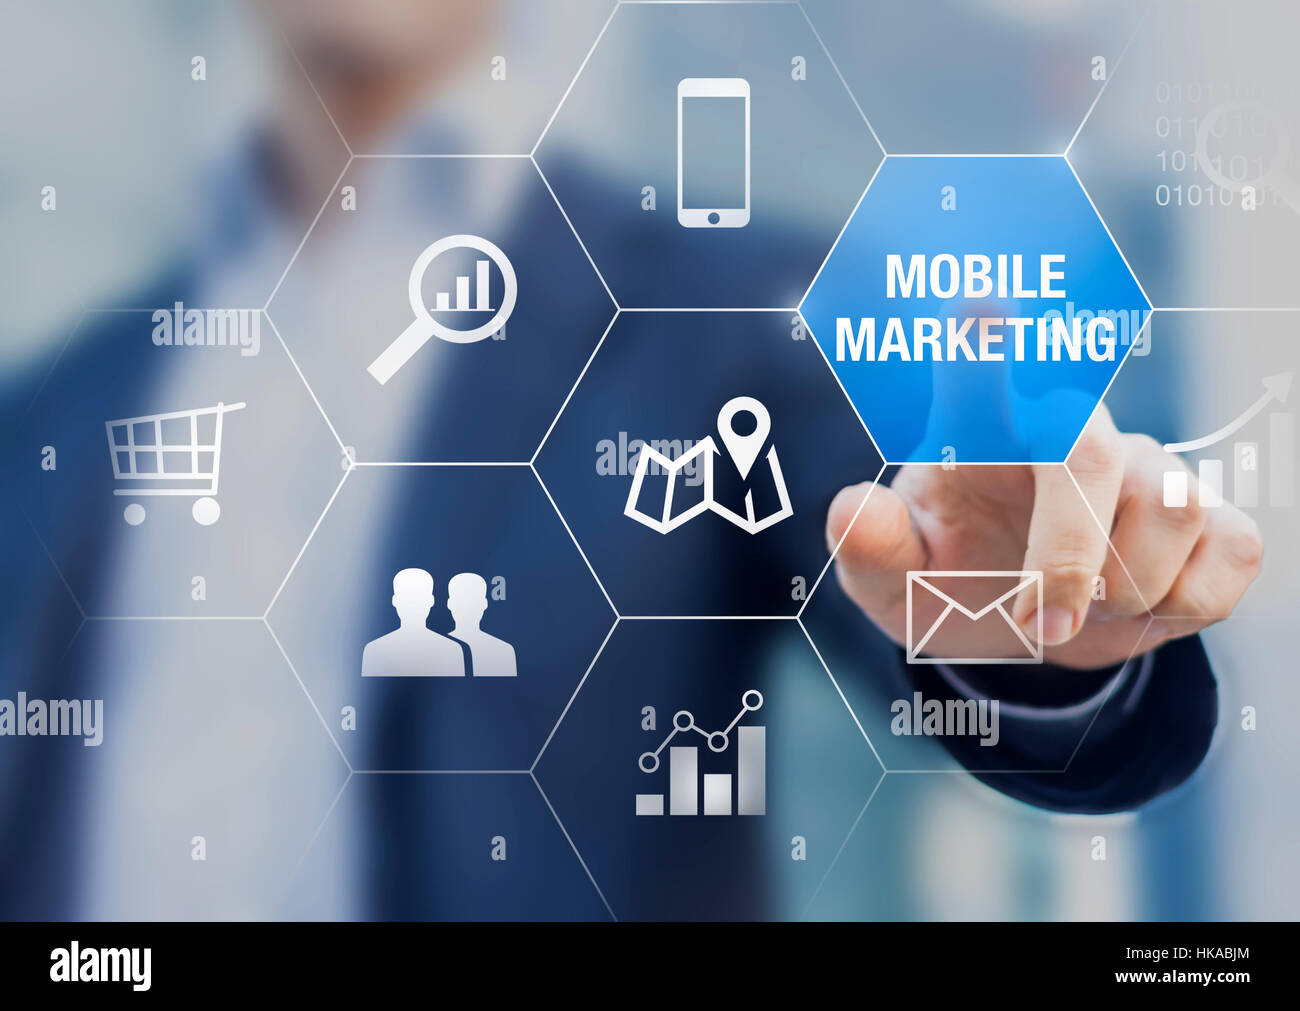 Mobile marketing and e-commerce data analytics concept with a business person touching a button on a modern digital interface Stock Photo